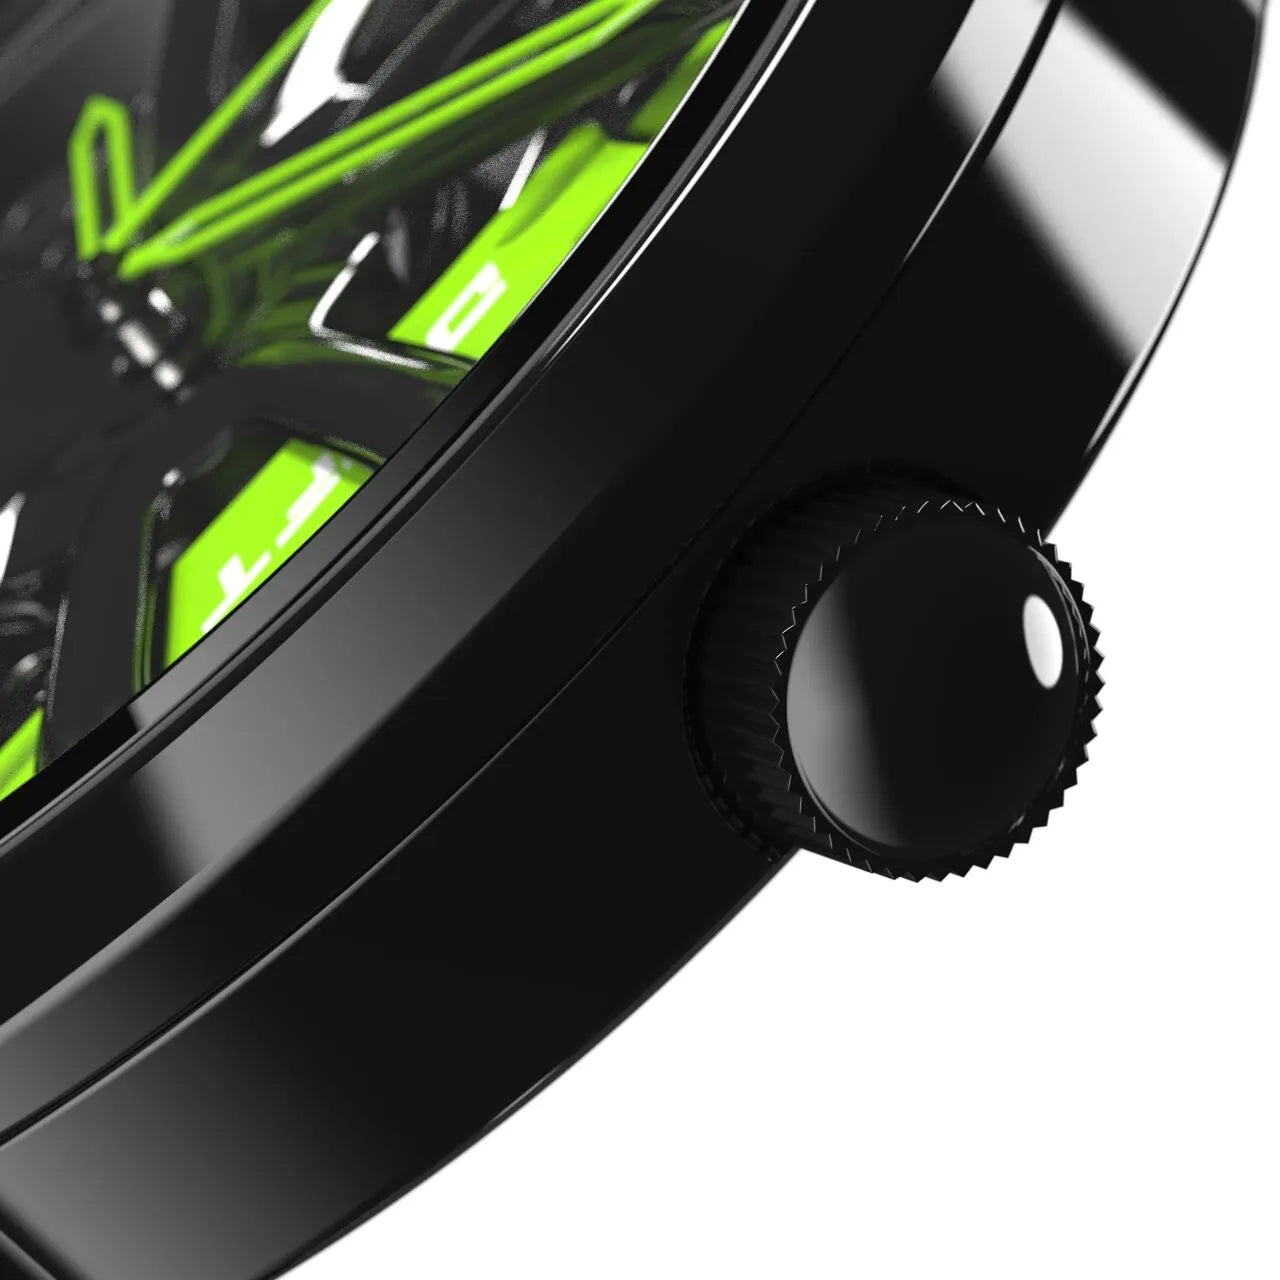 Illuminate your look with our dynamic green Performance GT Rim Watch! Engineered by a German startup, these precision watches are tailored to captivate motorsport, tuning, and auto enthusiasts. Get set to fuel your passion! #id_46744365465930